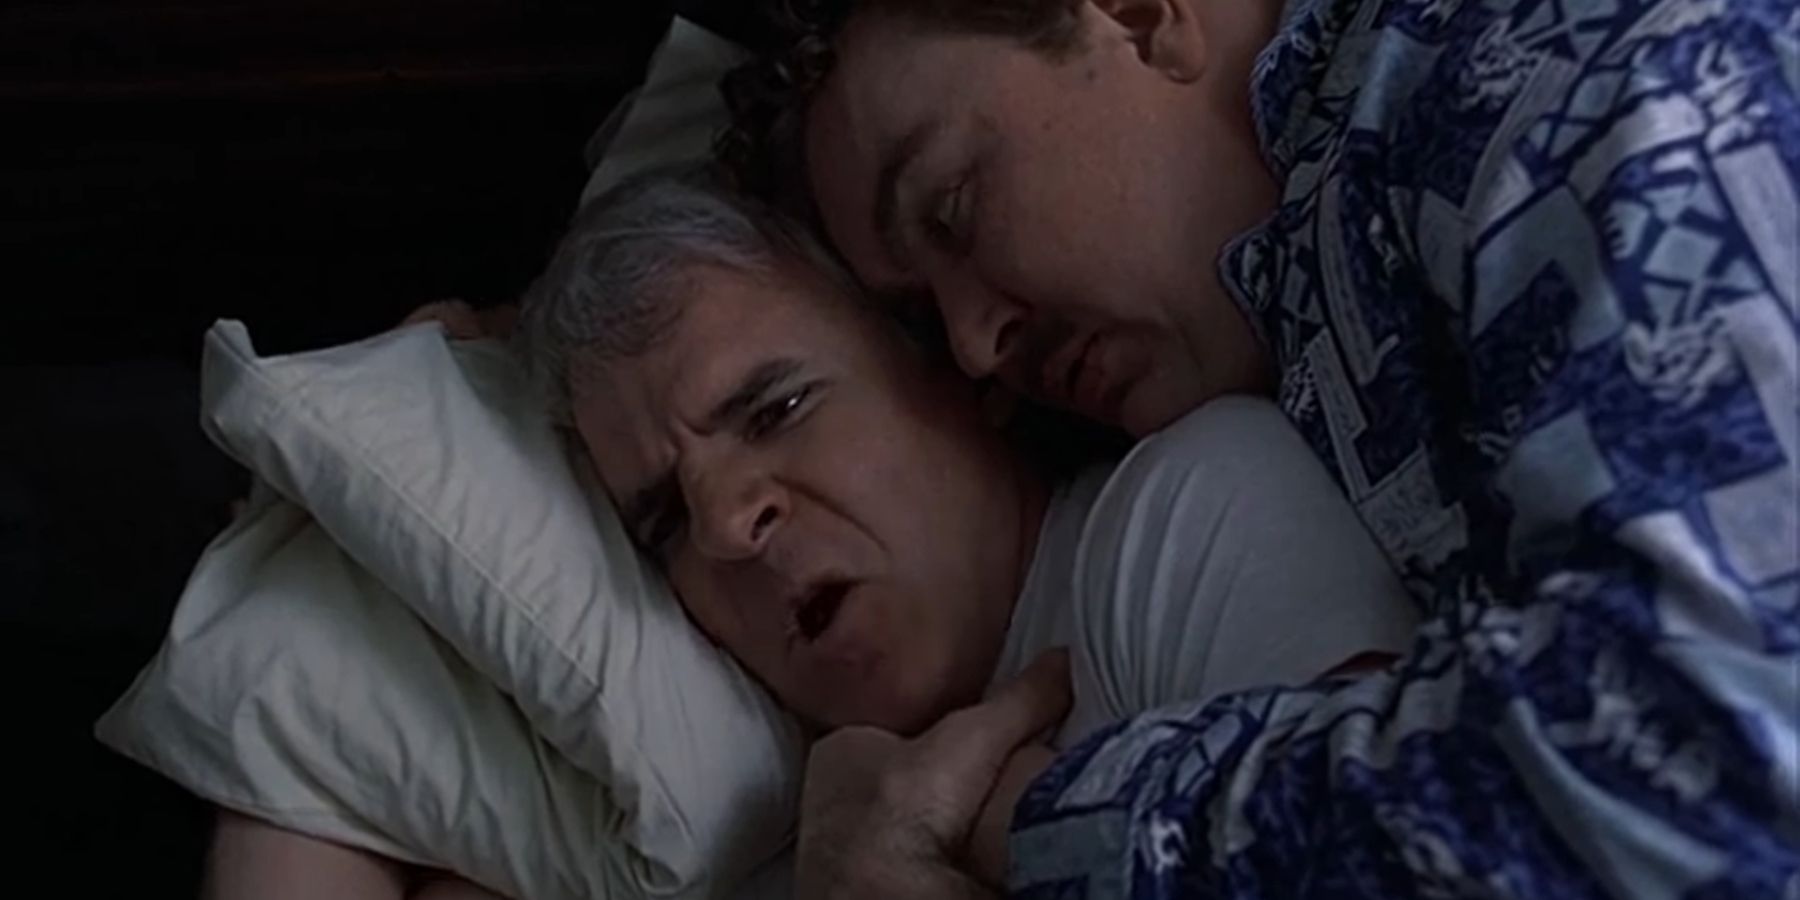 Del and Neal cuddling in bed in Planes Trains Automobiles